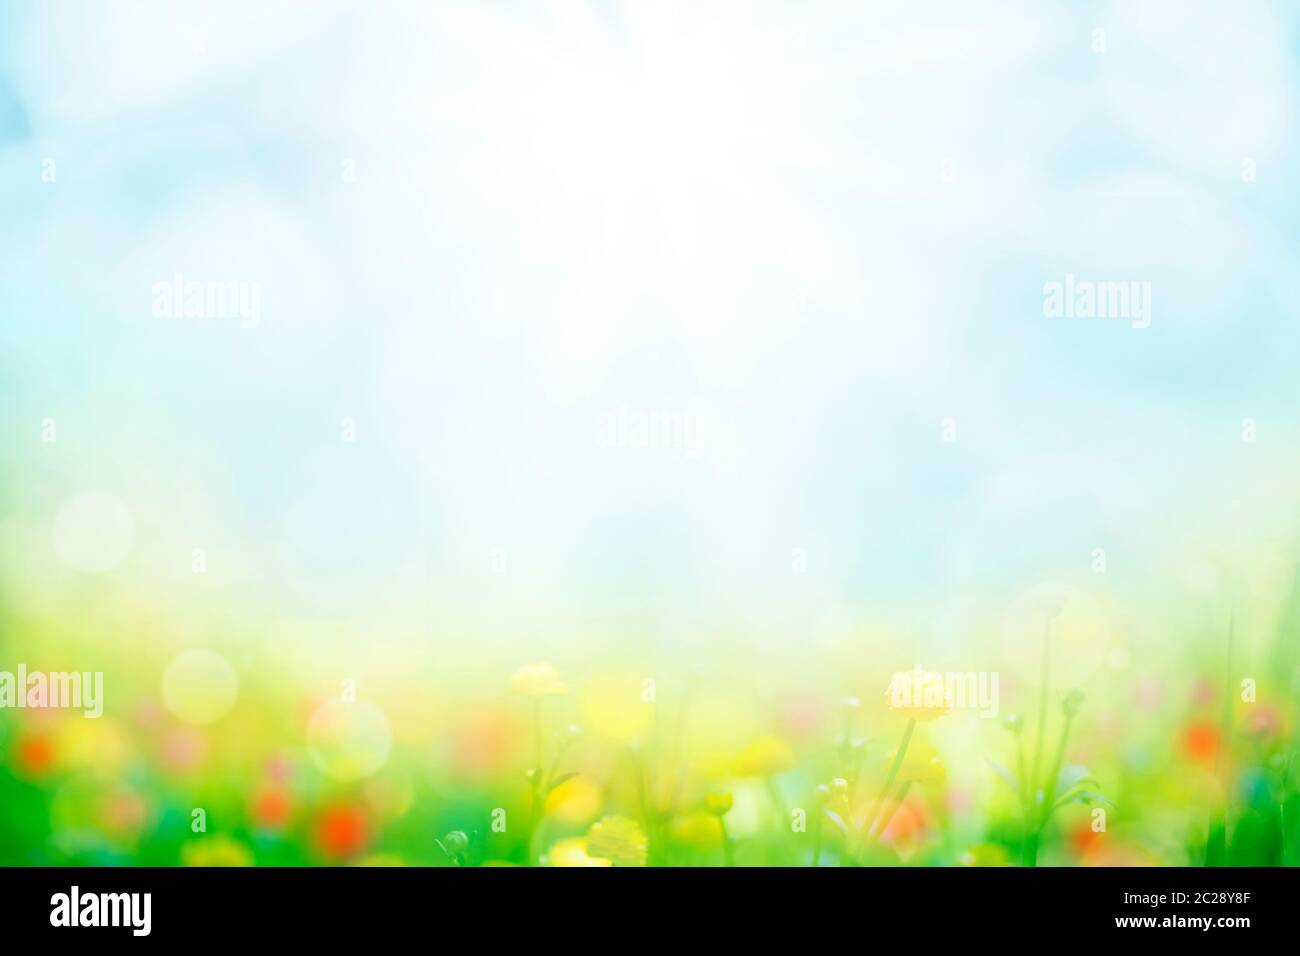 abstract background with green grass and flowers over sunny blue sky Stock Photo